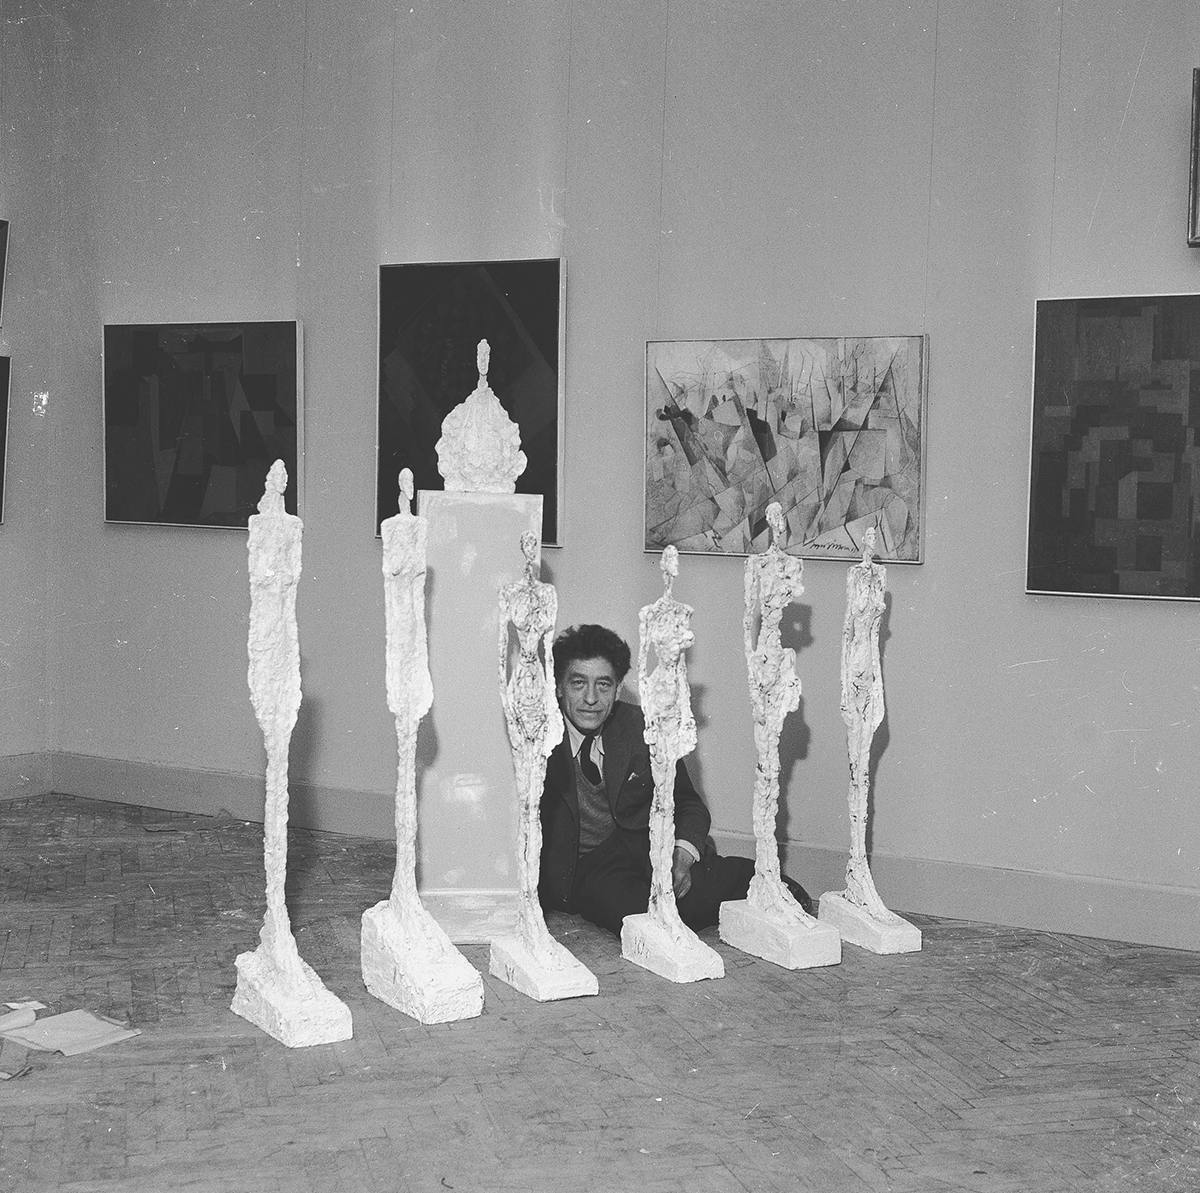 Alberto Giacometti and his sculptures at the Venice Biennale, 1956. Archives of the Giacometti Foundation. Image courtesy of Tate